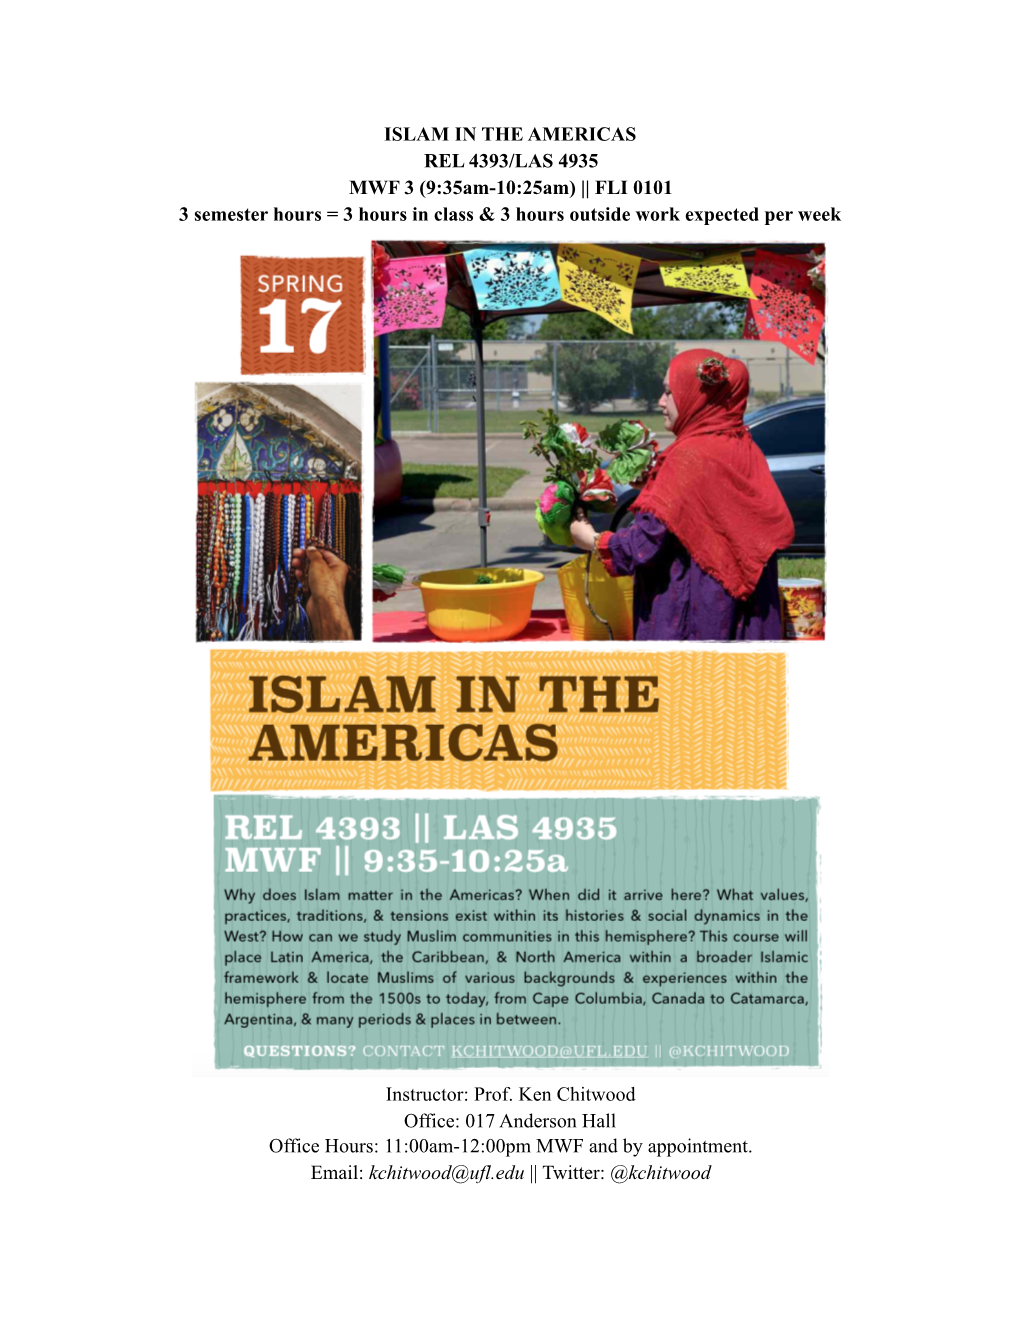 ISLAM in the AMERICAS REL 4393/LAS 4935 MWF 3 (9:35Am-10:25Am) || FLI 0101 3 Semester Hours = 3 Hours in Class & 3 Hours Outside Work Expected Per Week